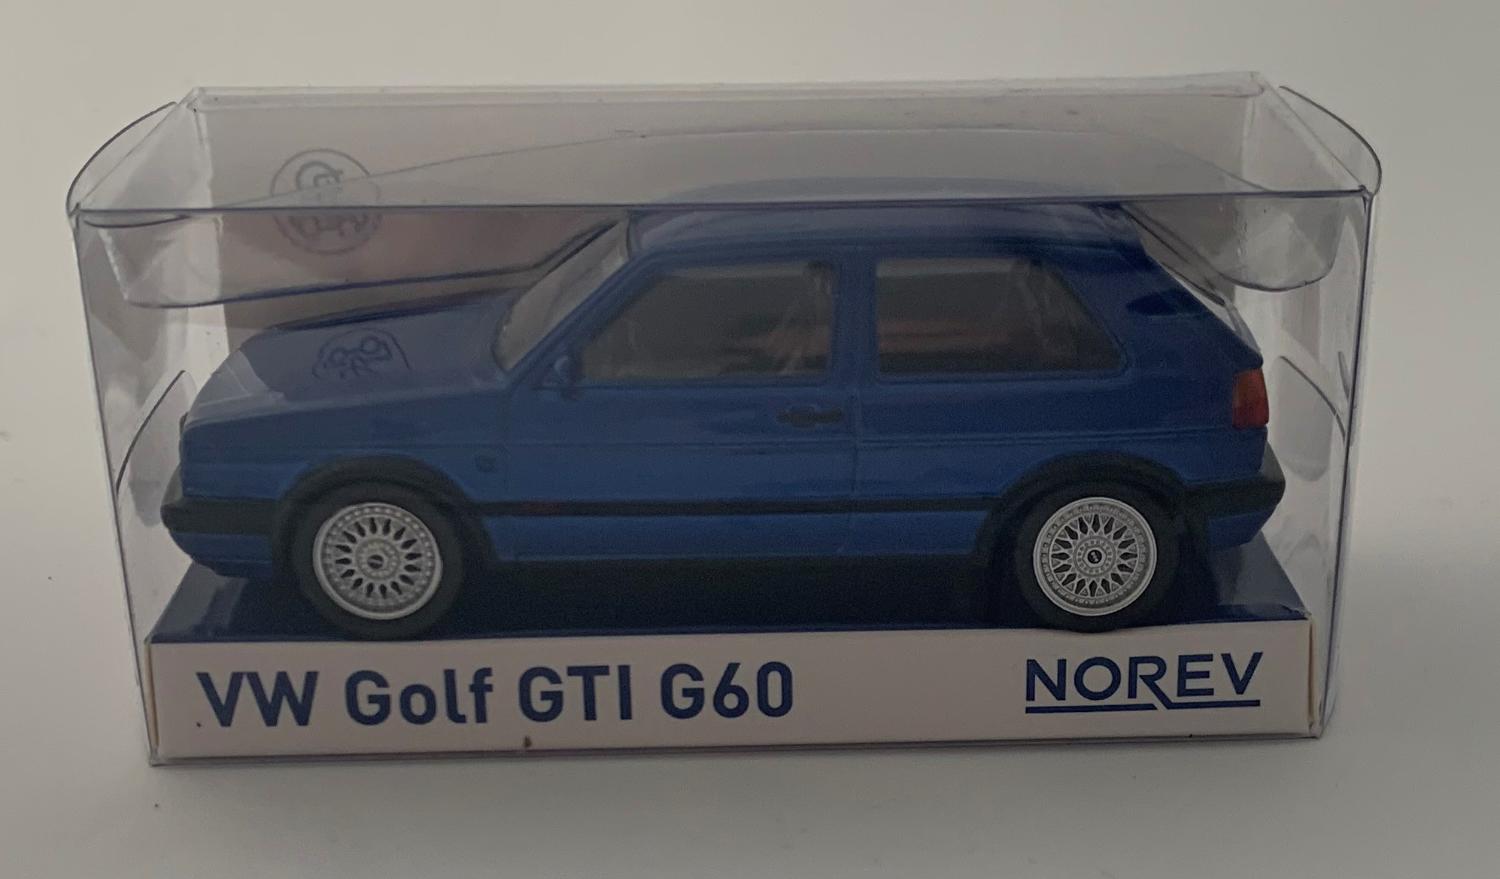 A good replica of the VW Golf GTI G60 decorated in metallic blue with silver wheels